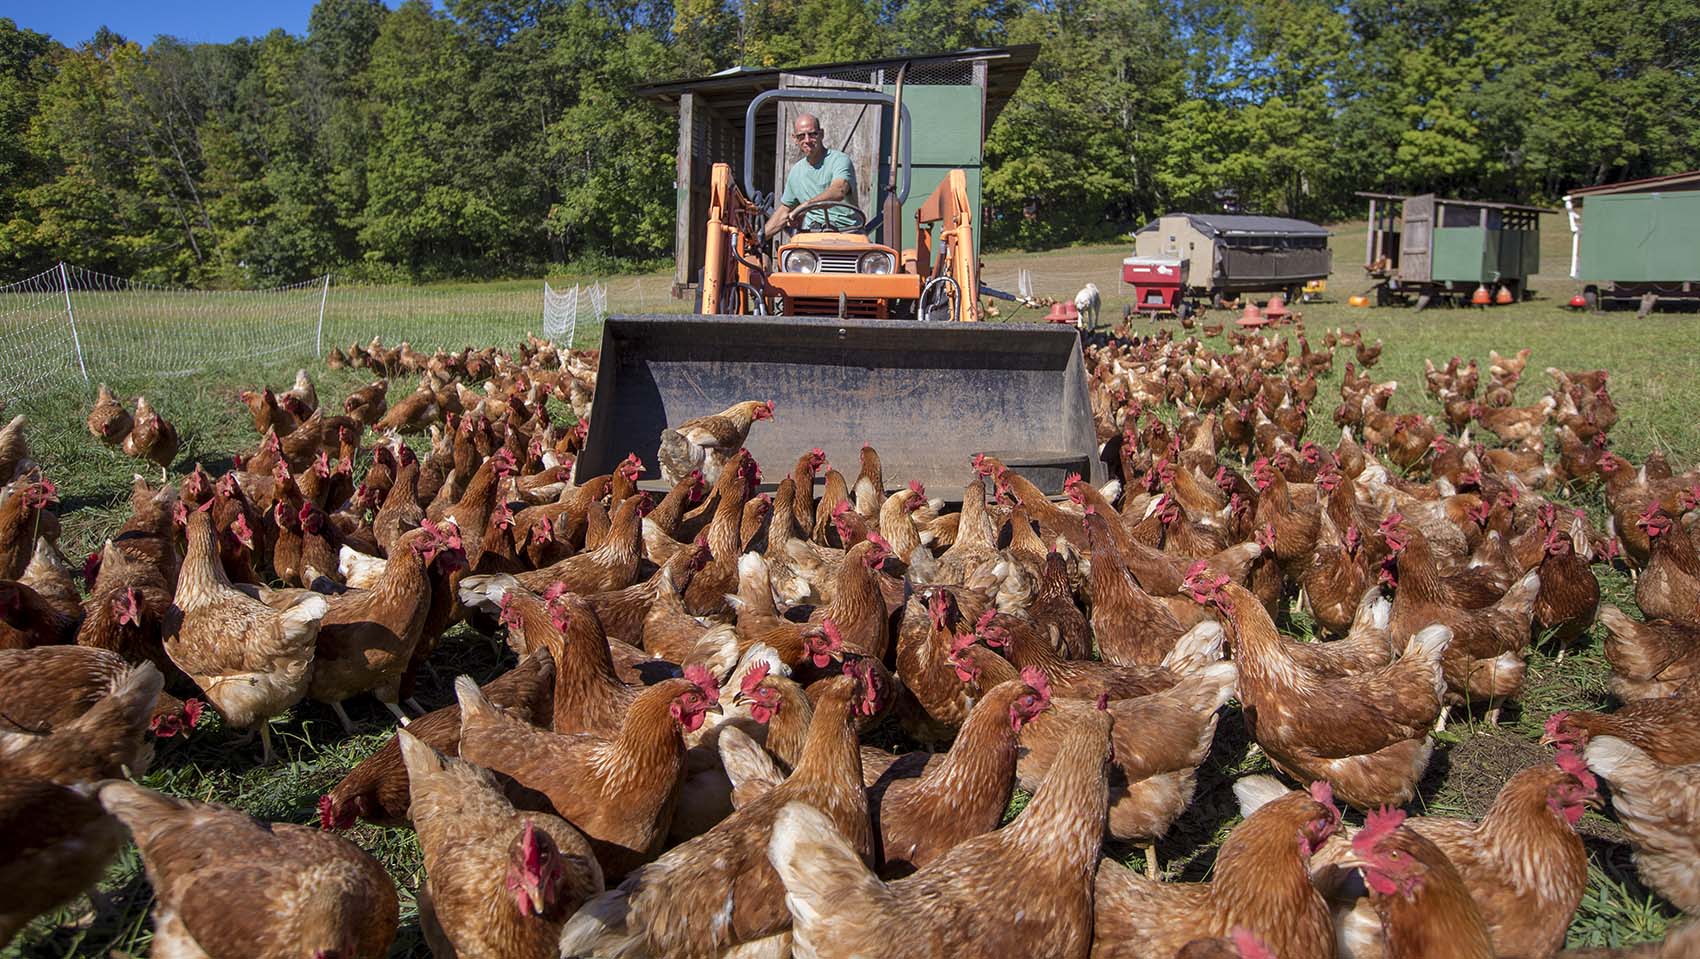 Chickens swarm farmer Pete Lowy, of Codman Farms in Lincoln, as he uses a tractor to move a chicken house. (Jesse Costa/WBUR)